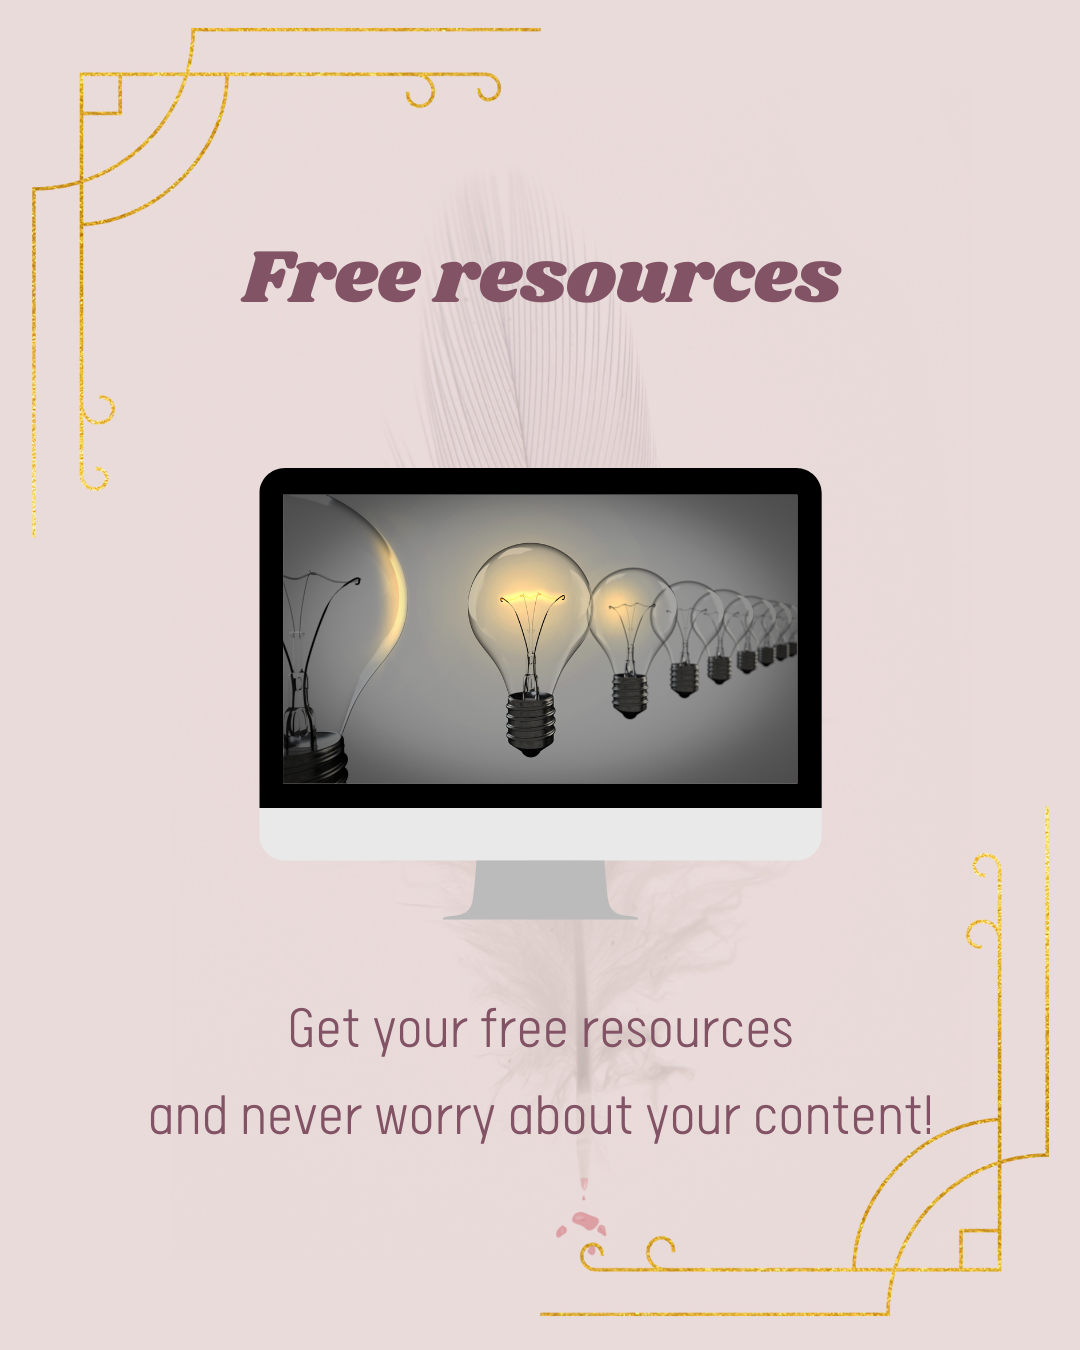 Free resources